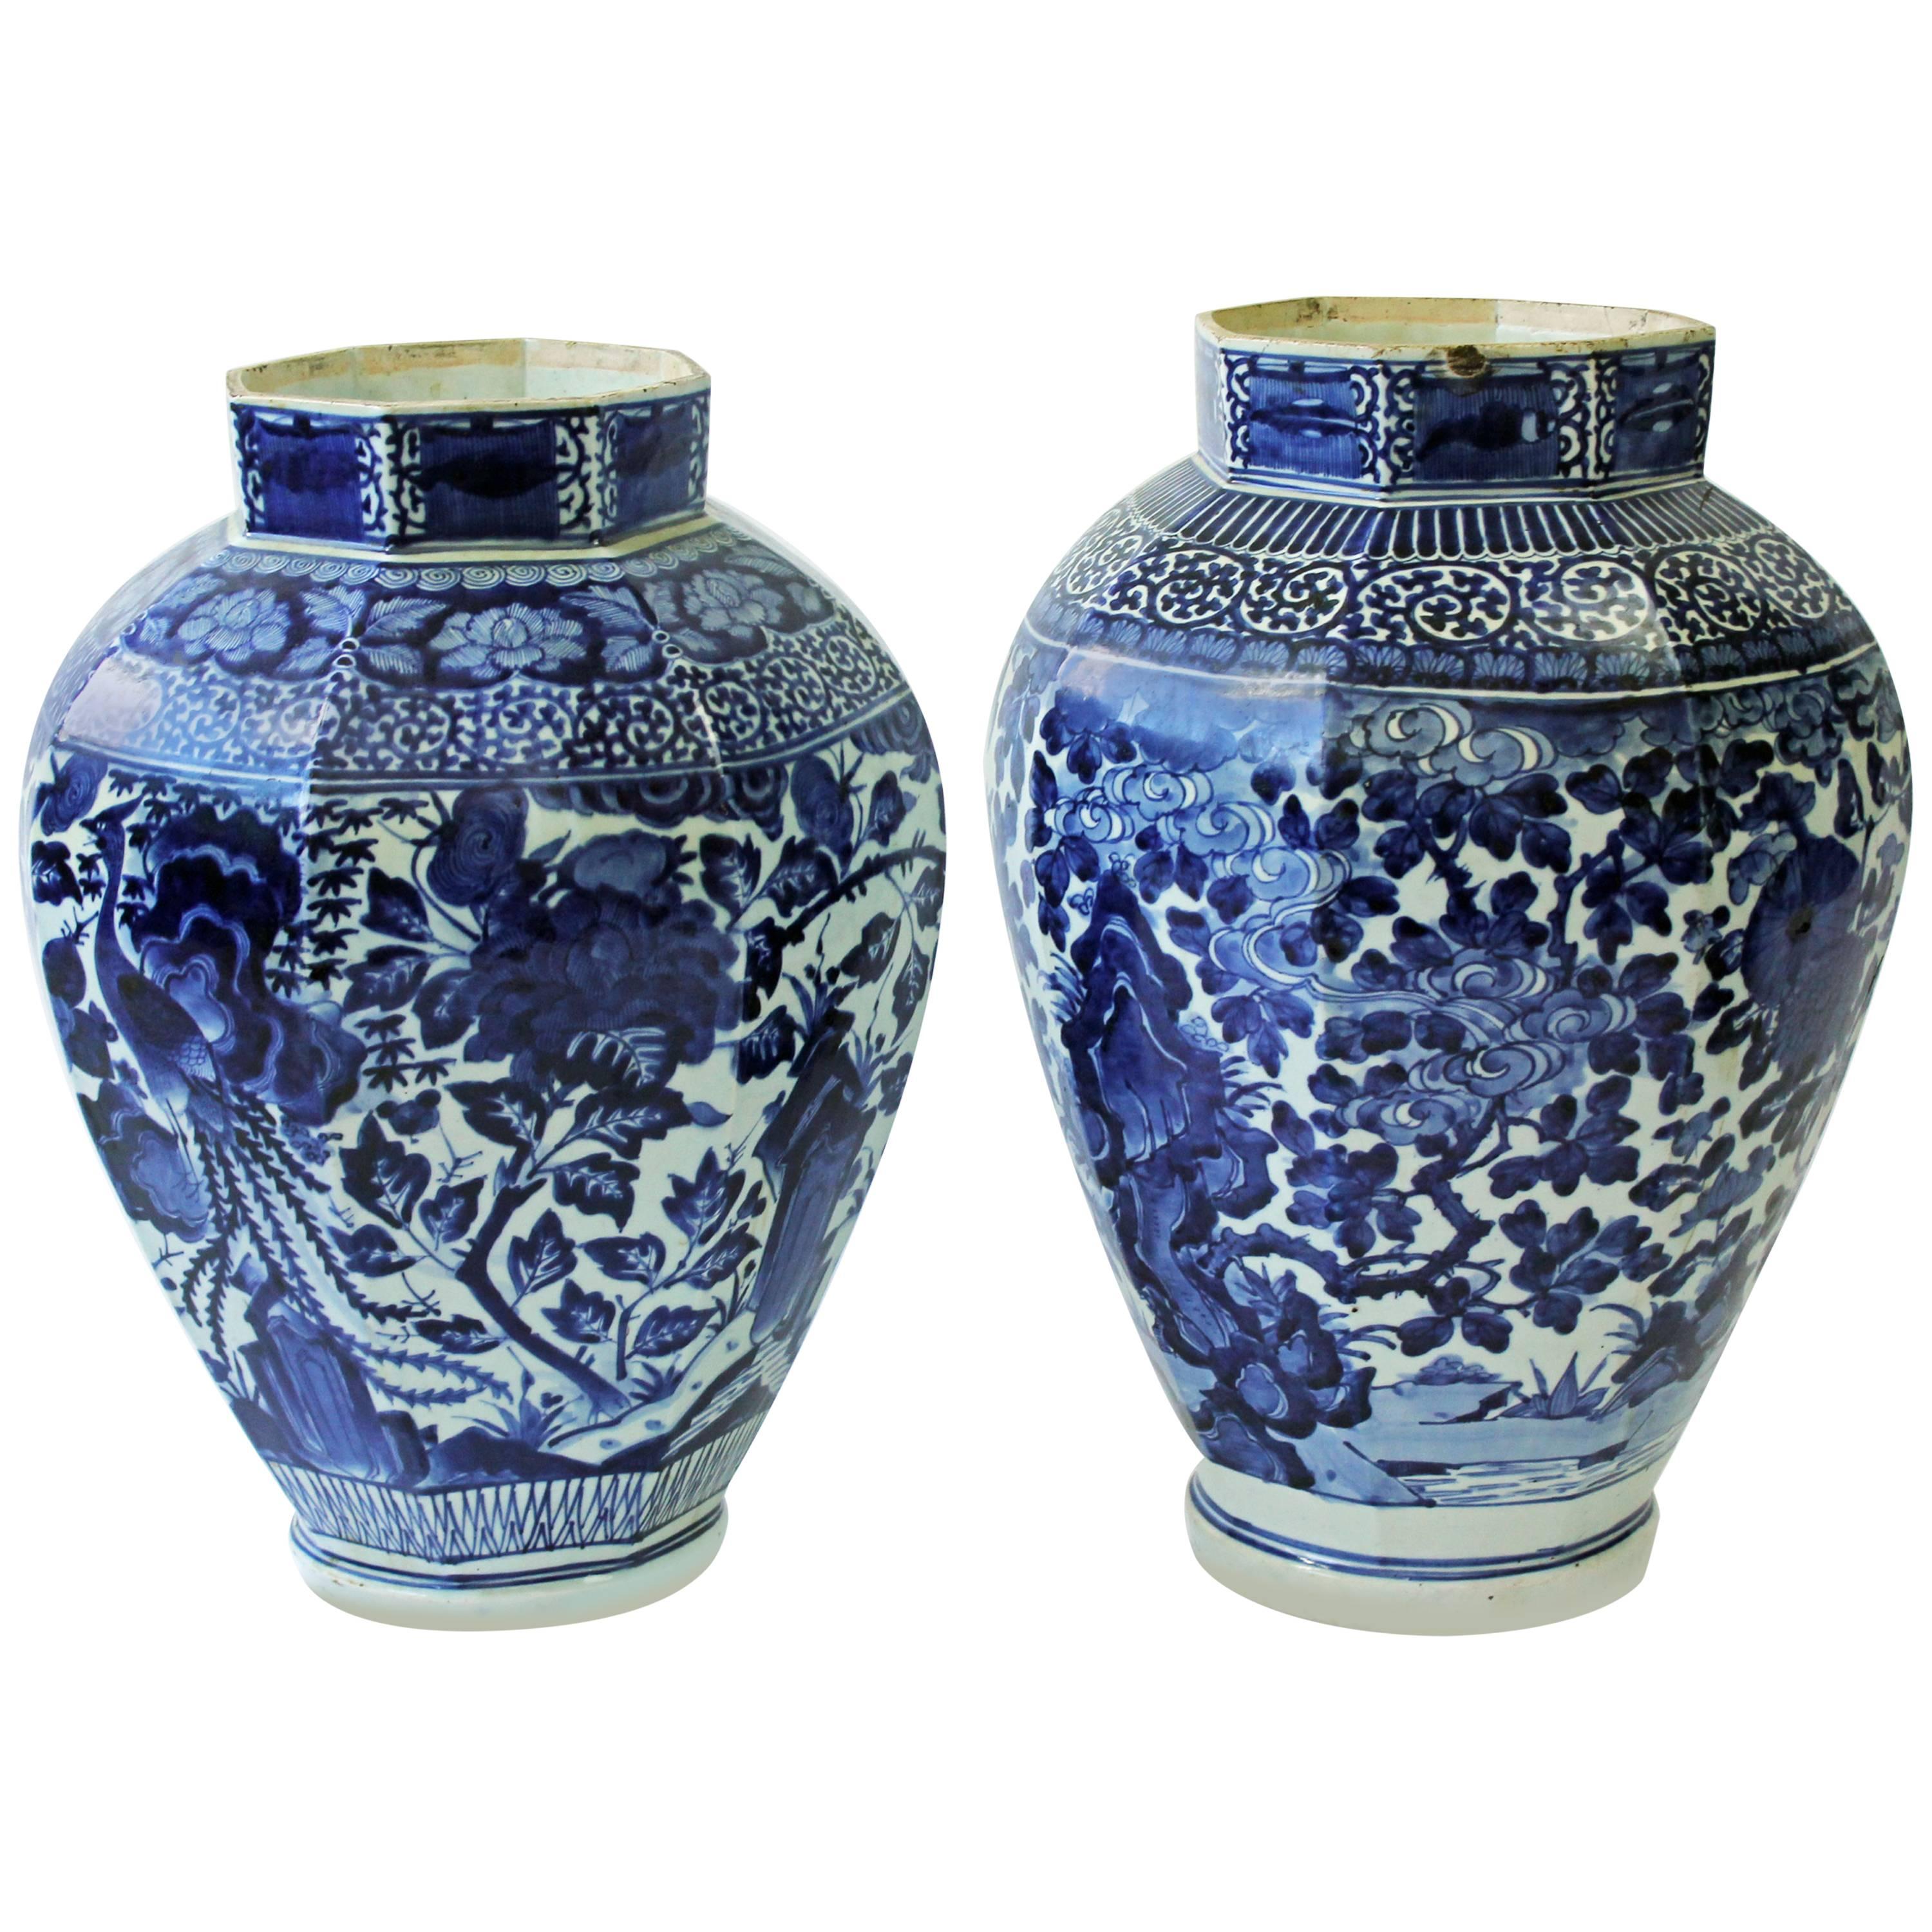 Huge Near Pair of Late Japanese Octagonal Arita Blue and White Vases For Sale